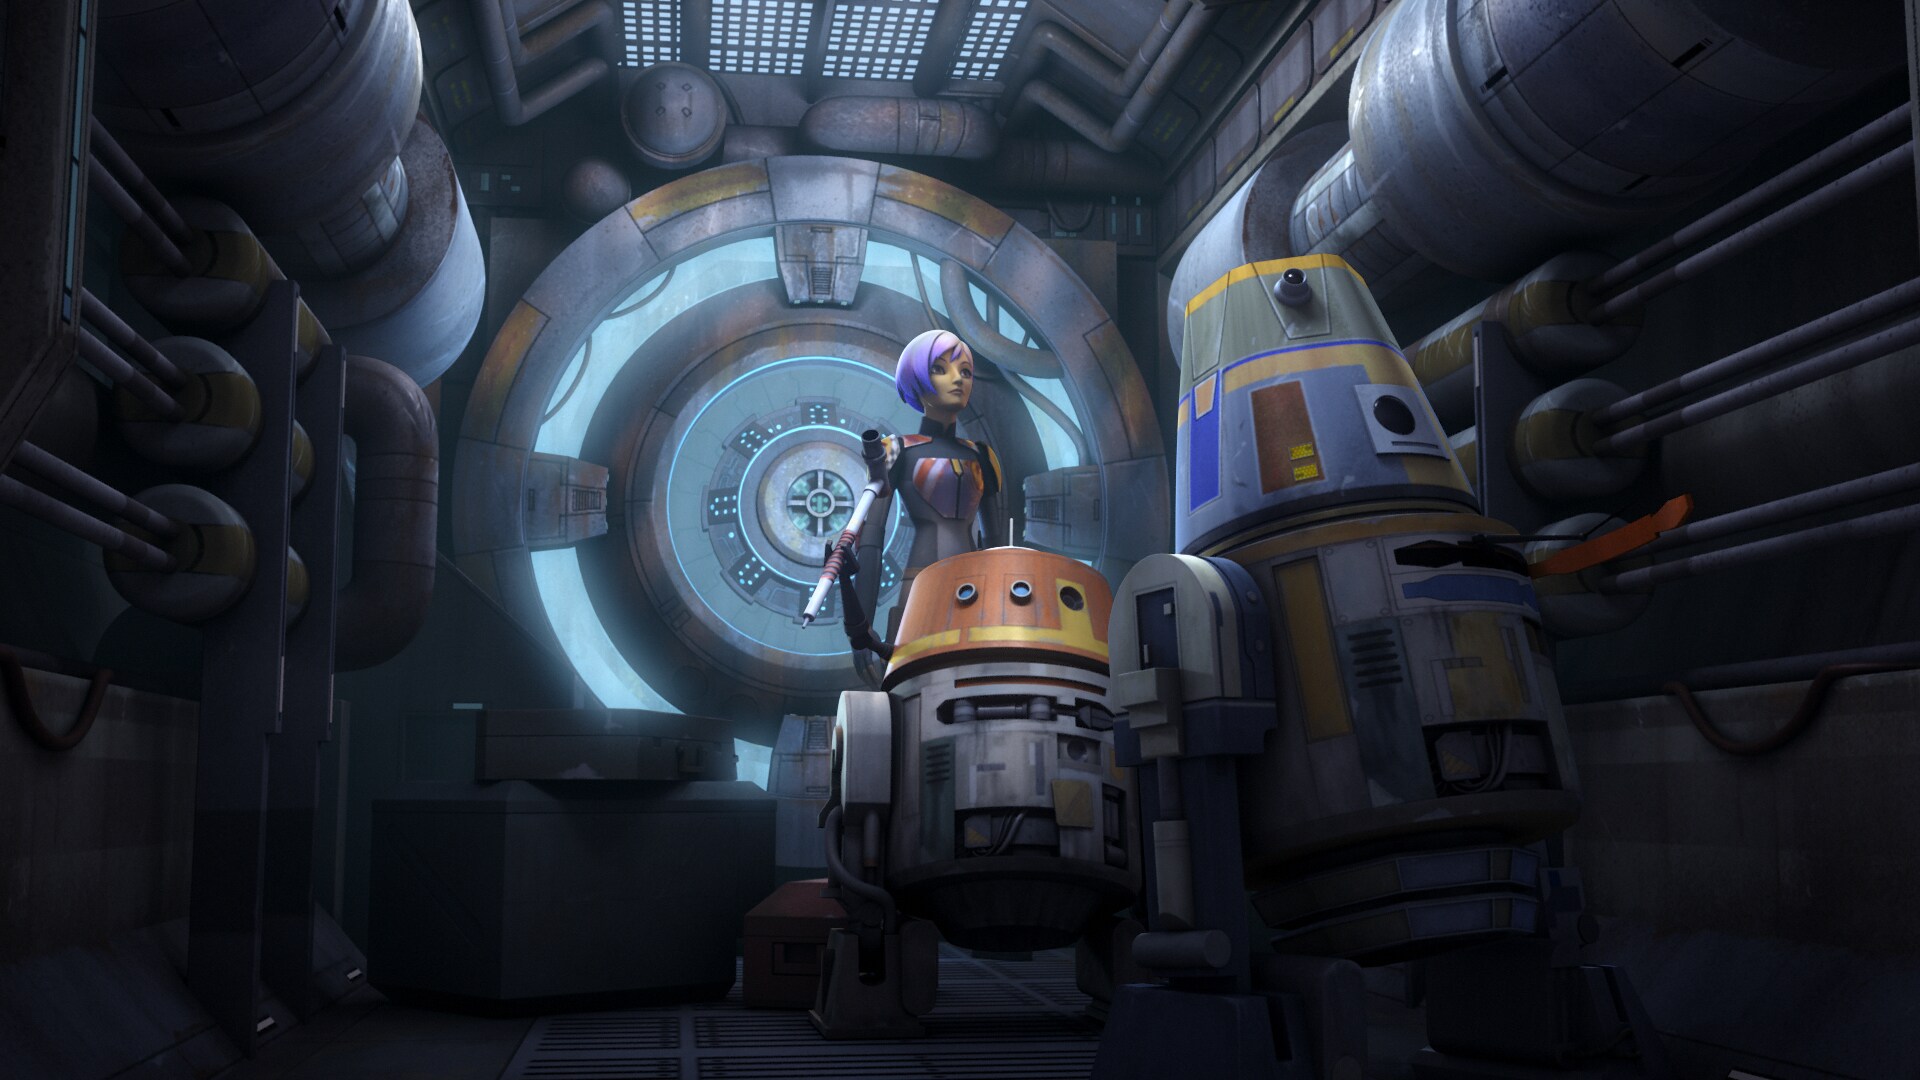 Led by Ezra and Sabine, Chopper works to restore the ship's hyperdrive. But soon thereafter, Mart...